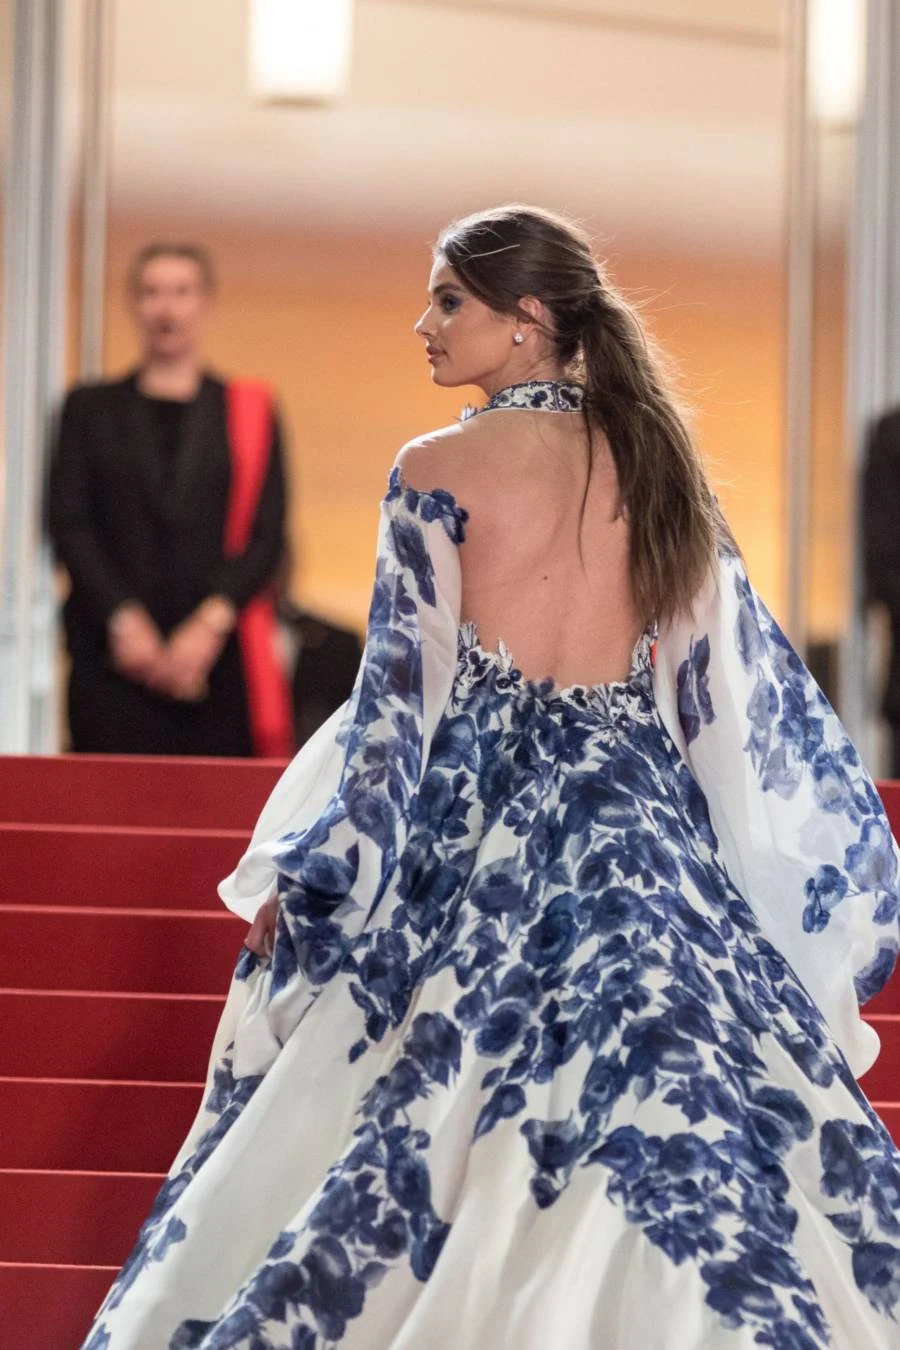 American Model Taylor Hill at Cannes Film Festival 2019